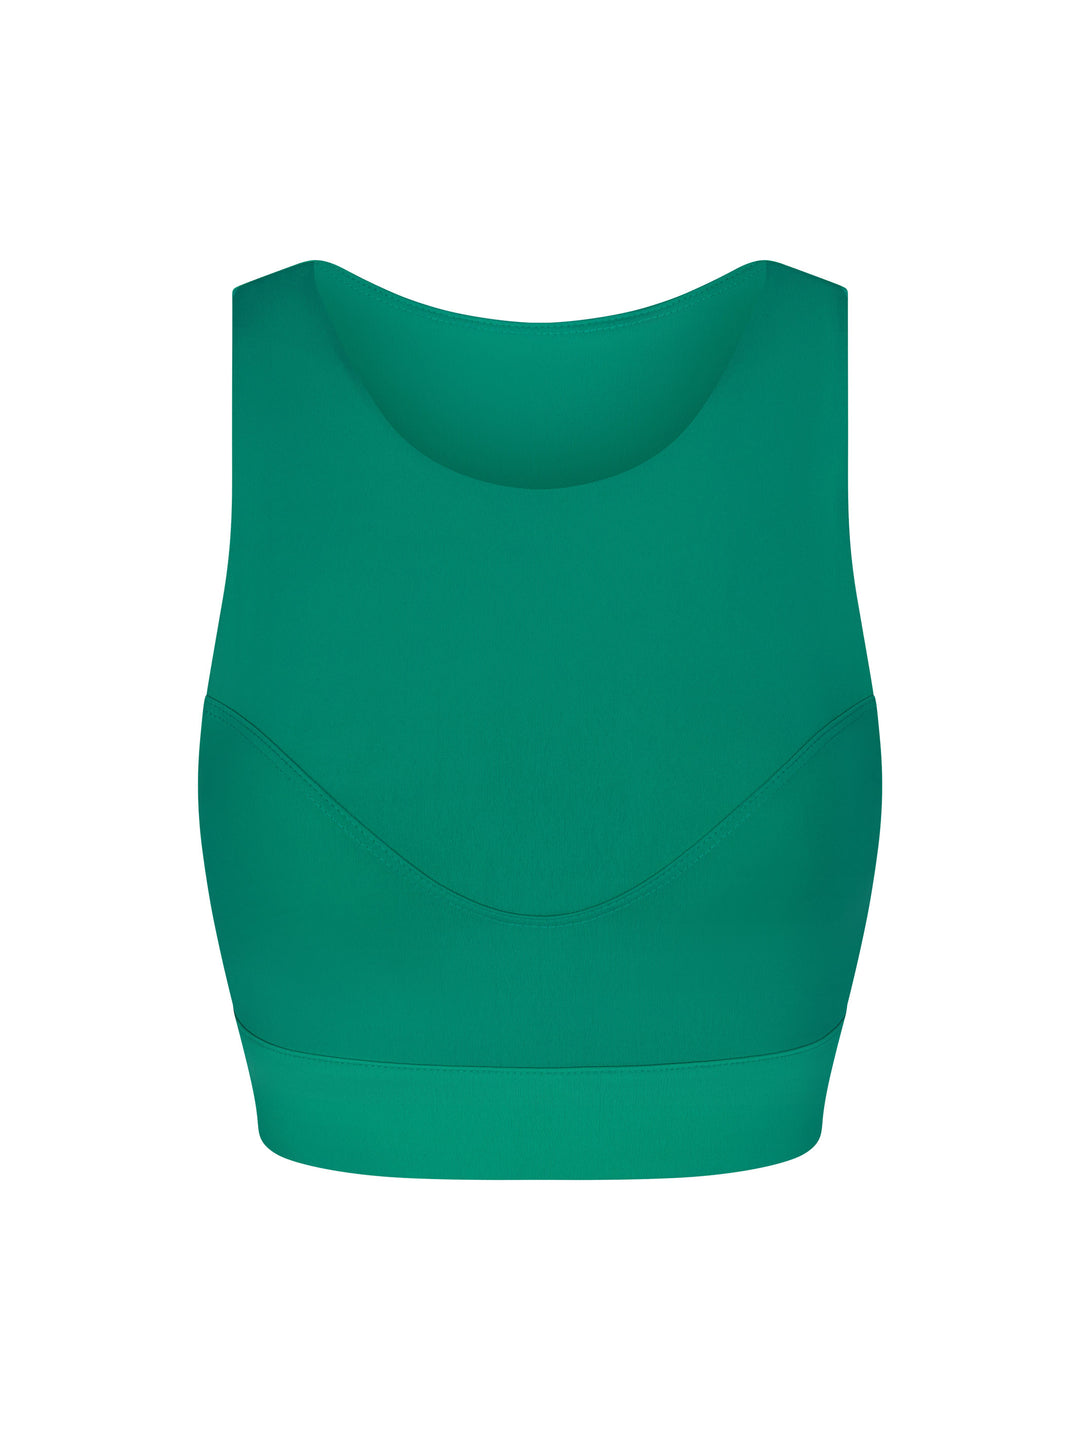 Racer Back Sports Bra with a high neck line, front view in jade.